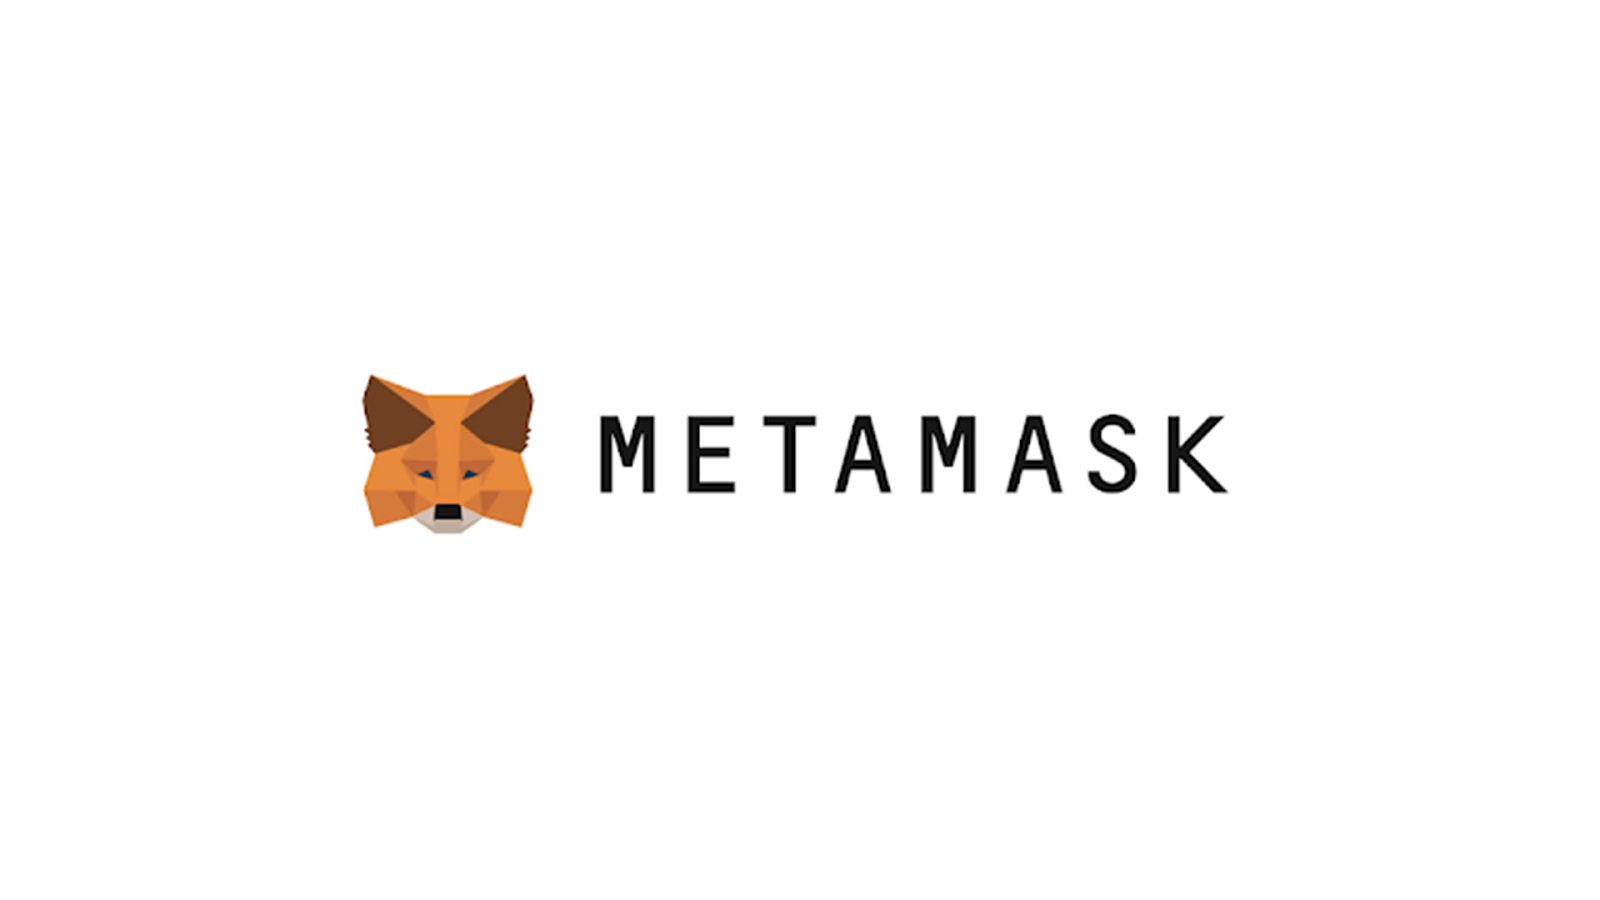 Metamask logo, a fox's head. This is the most widely used decentralized wallet